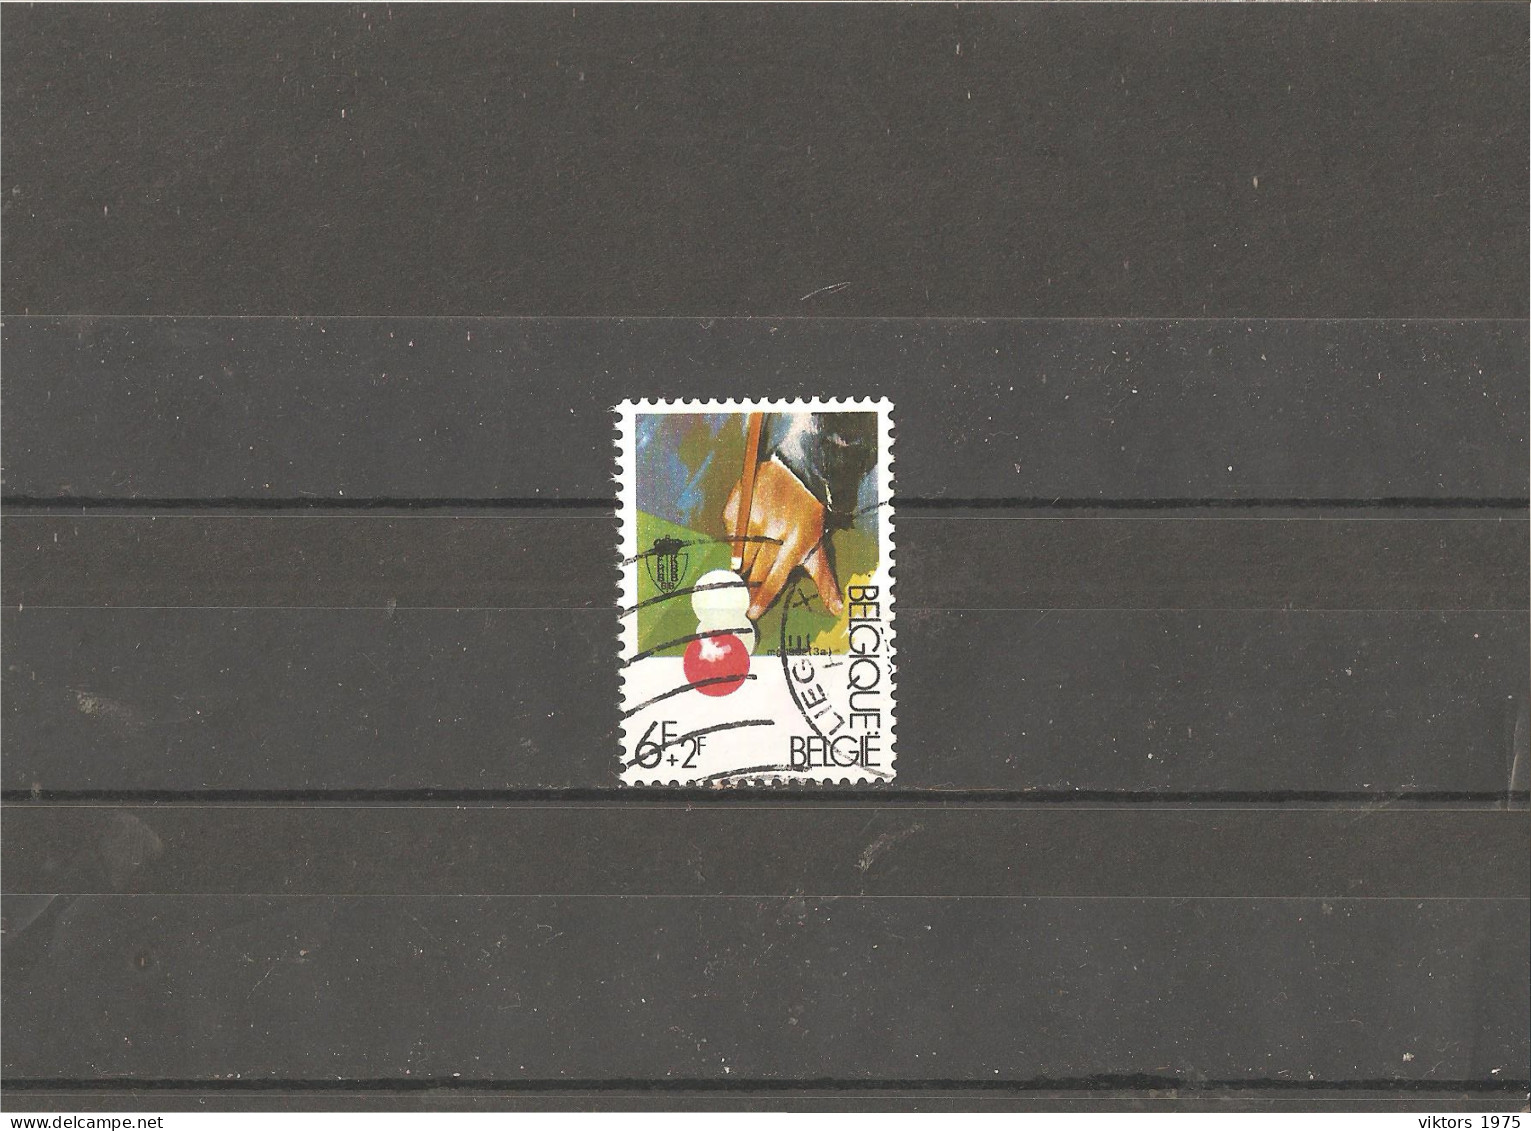 Used Stamp Nr.2091 In MICHEL Catalog - Used Stamps